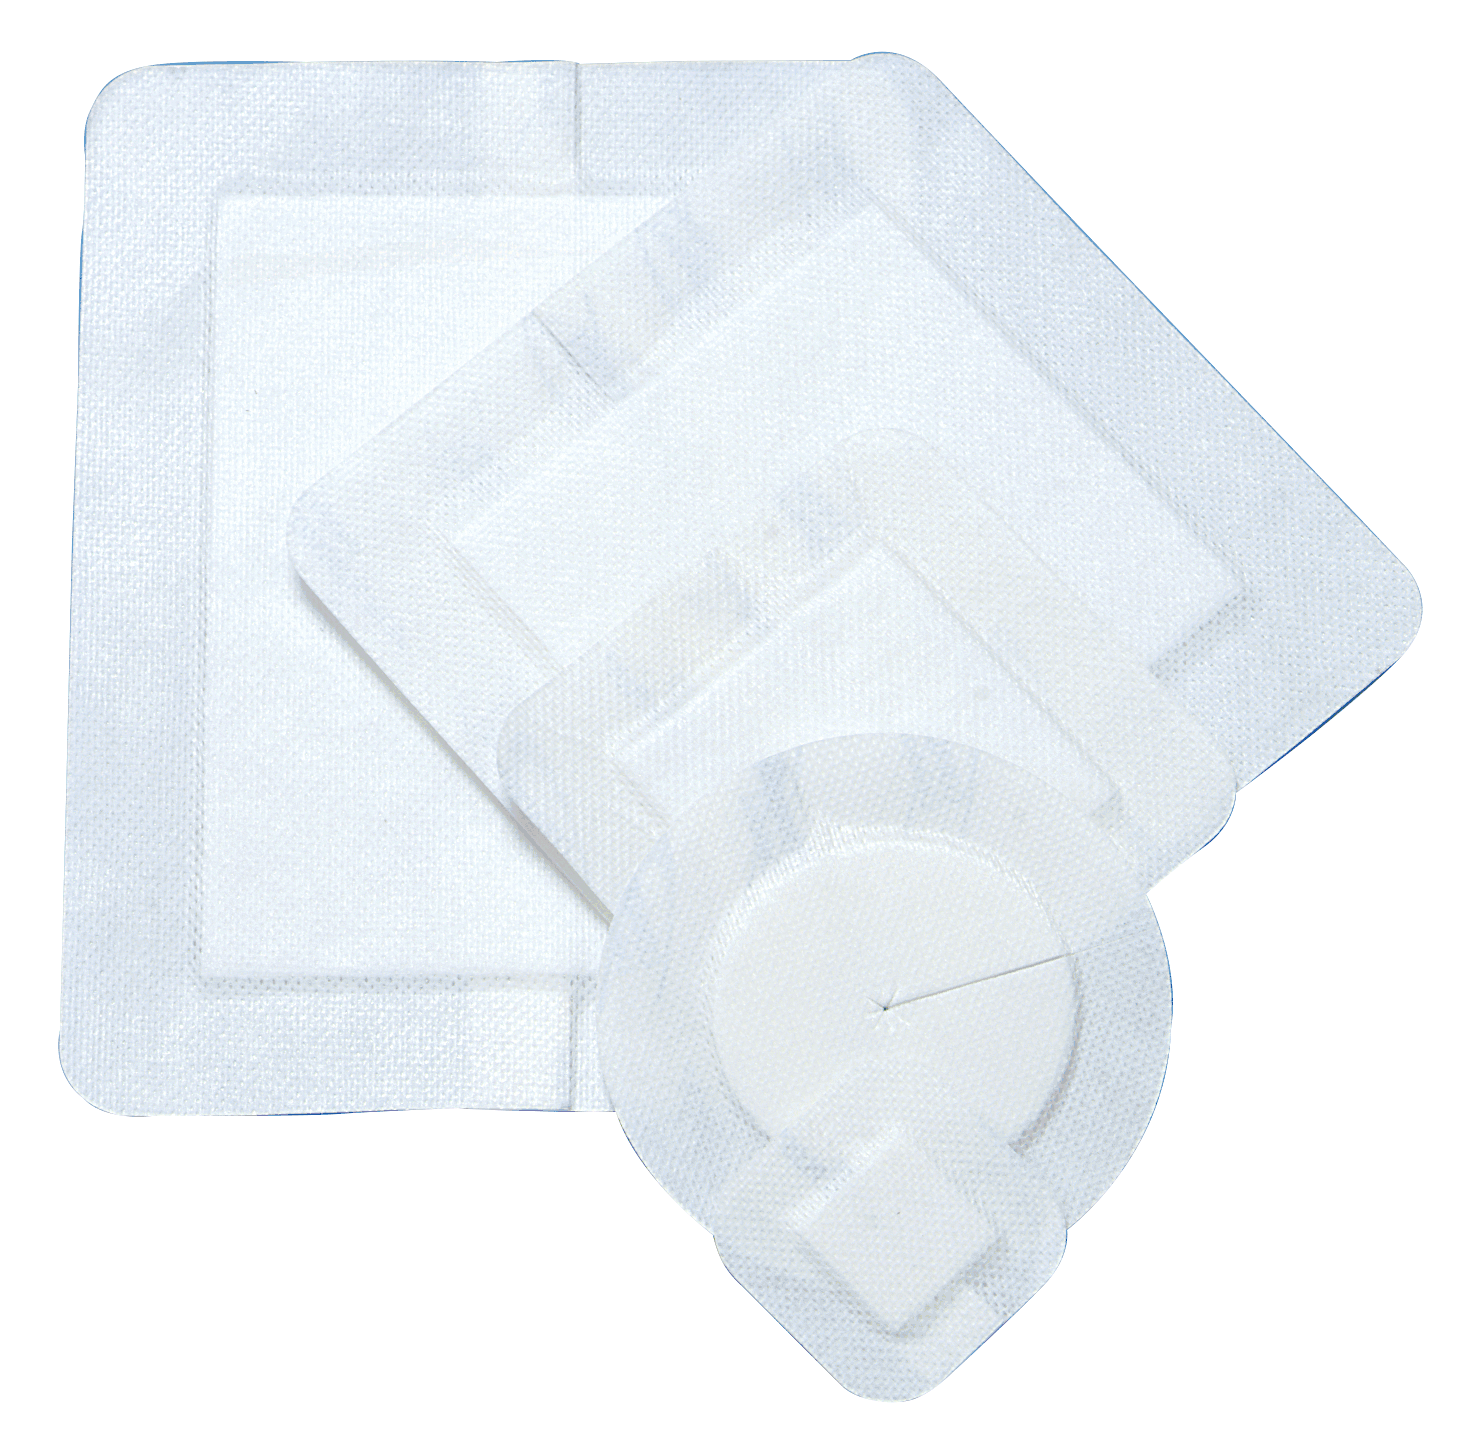 BX/25 - DeRoyal Covaderm&reg; Plus Adhesive Barrier Wound Dressing, Non Adherent, Breathable 2" x 2" - Best Buy Medical Supplies